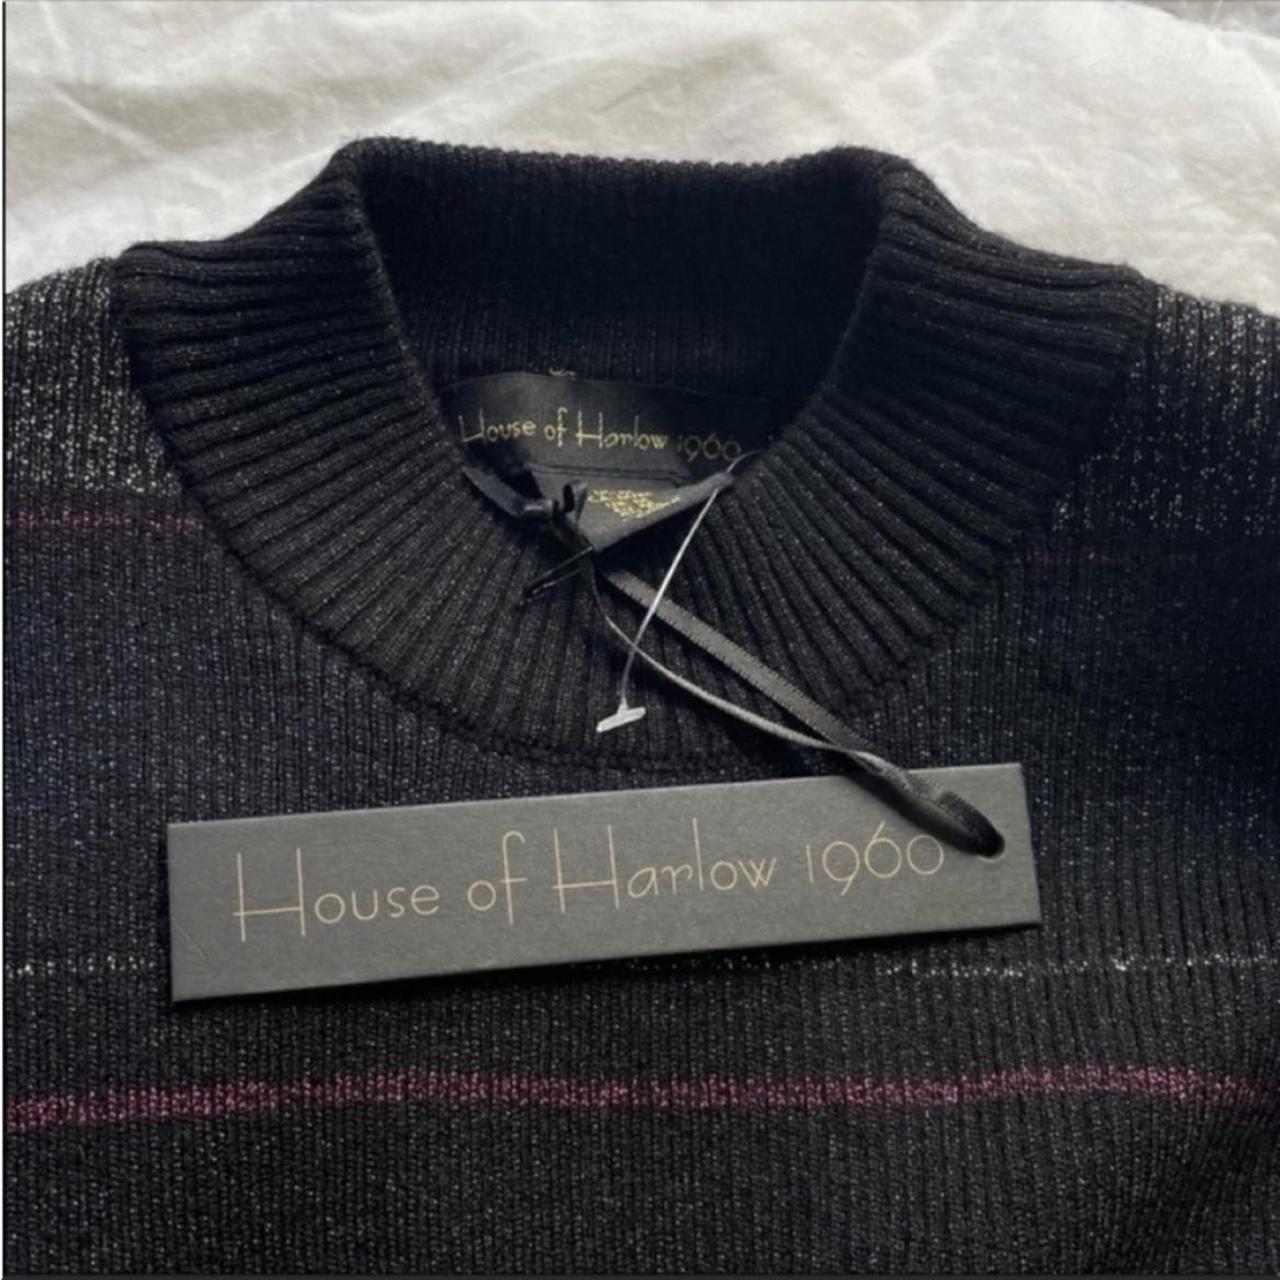 House of Harlow Women's Black and Silver Jumper (2)